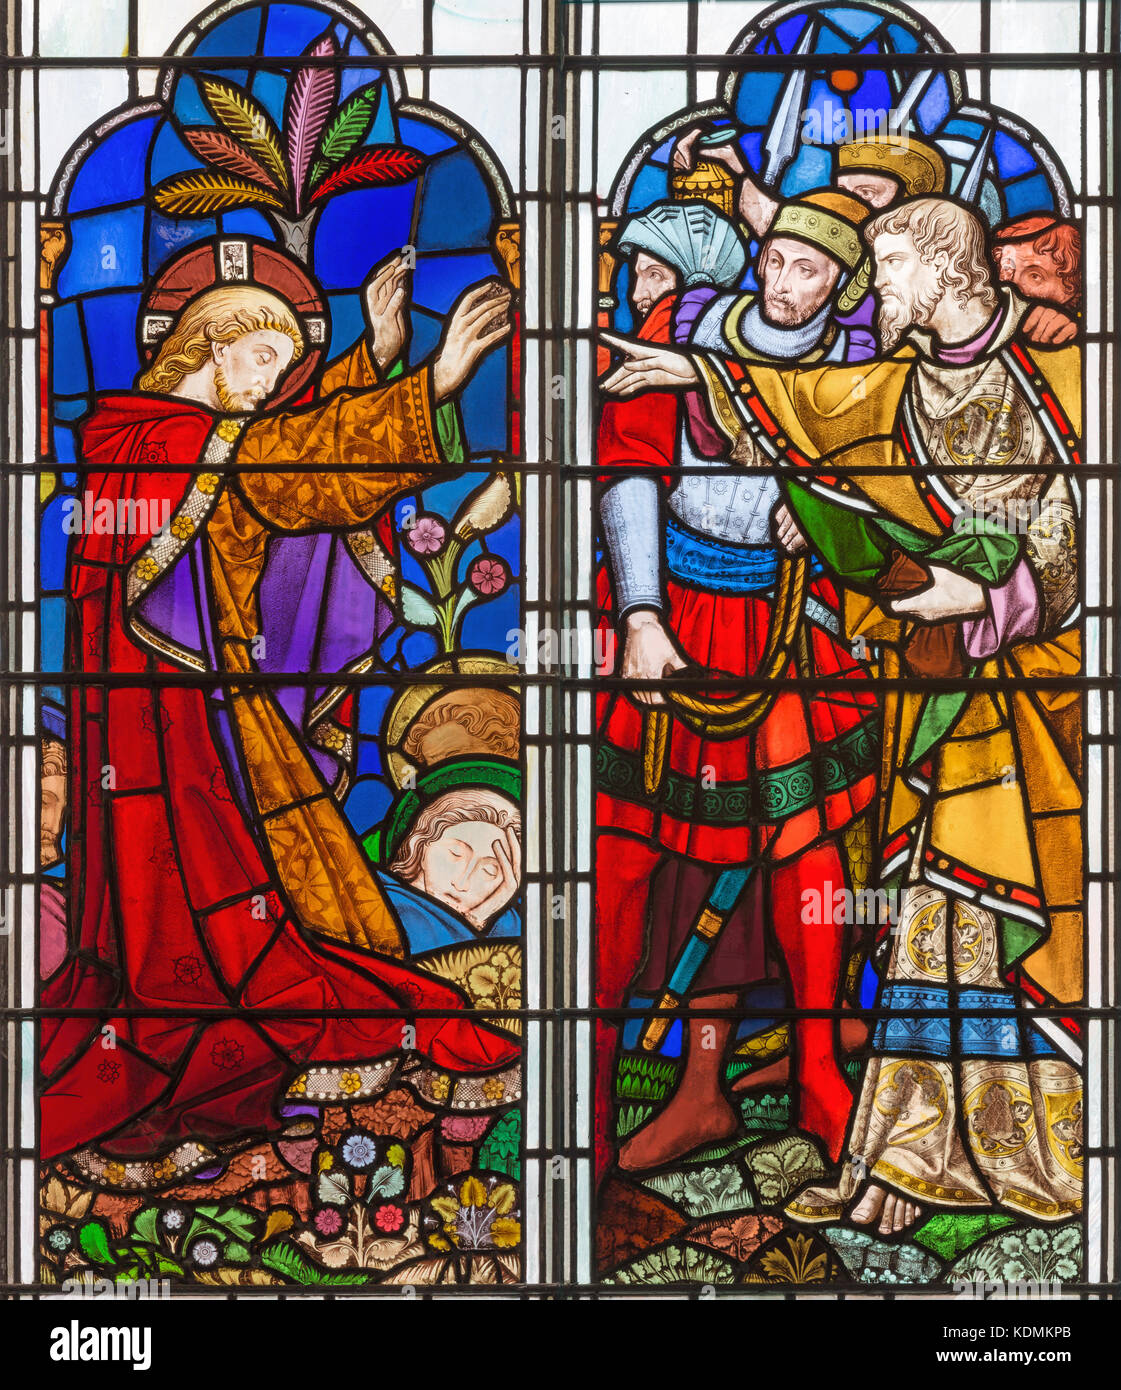 LONDON, GREAT BRITAIN - SEPTEMBER 14, 2017: The arresting of Jesus in the Gethsemane garden on the stained glass in the church St. Michael Cornhill. Stock Photo